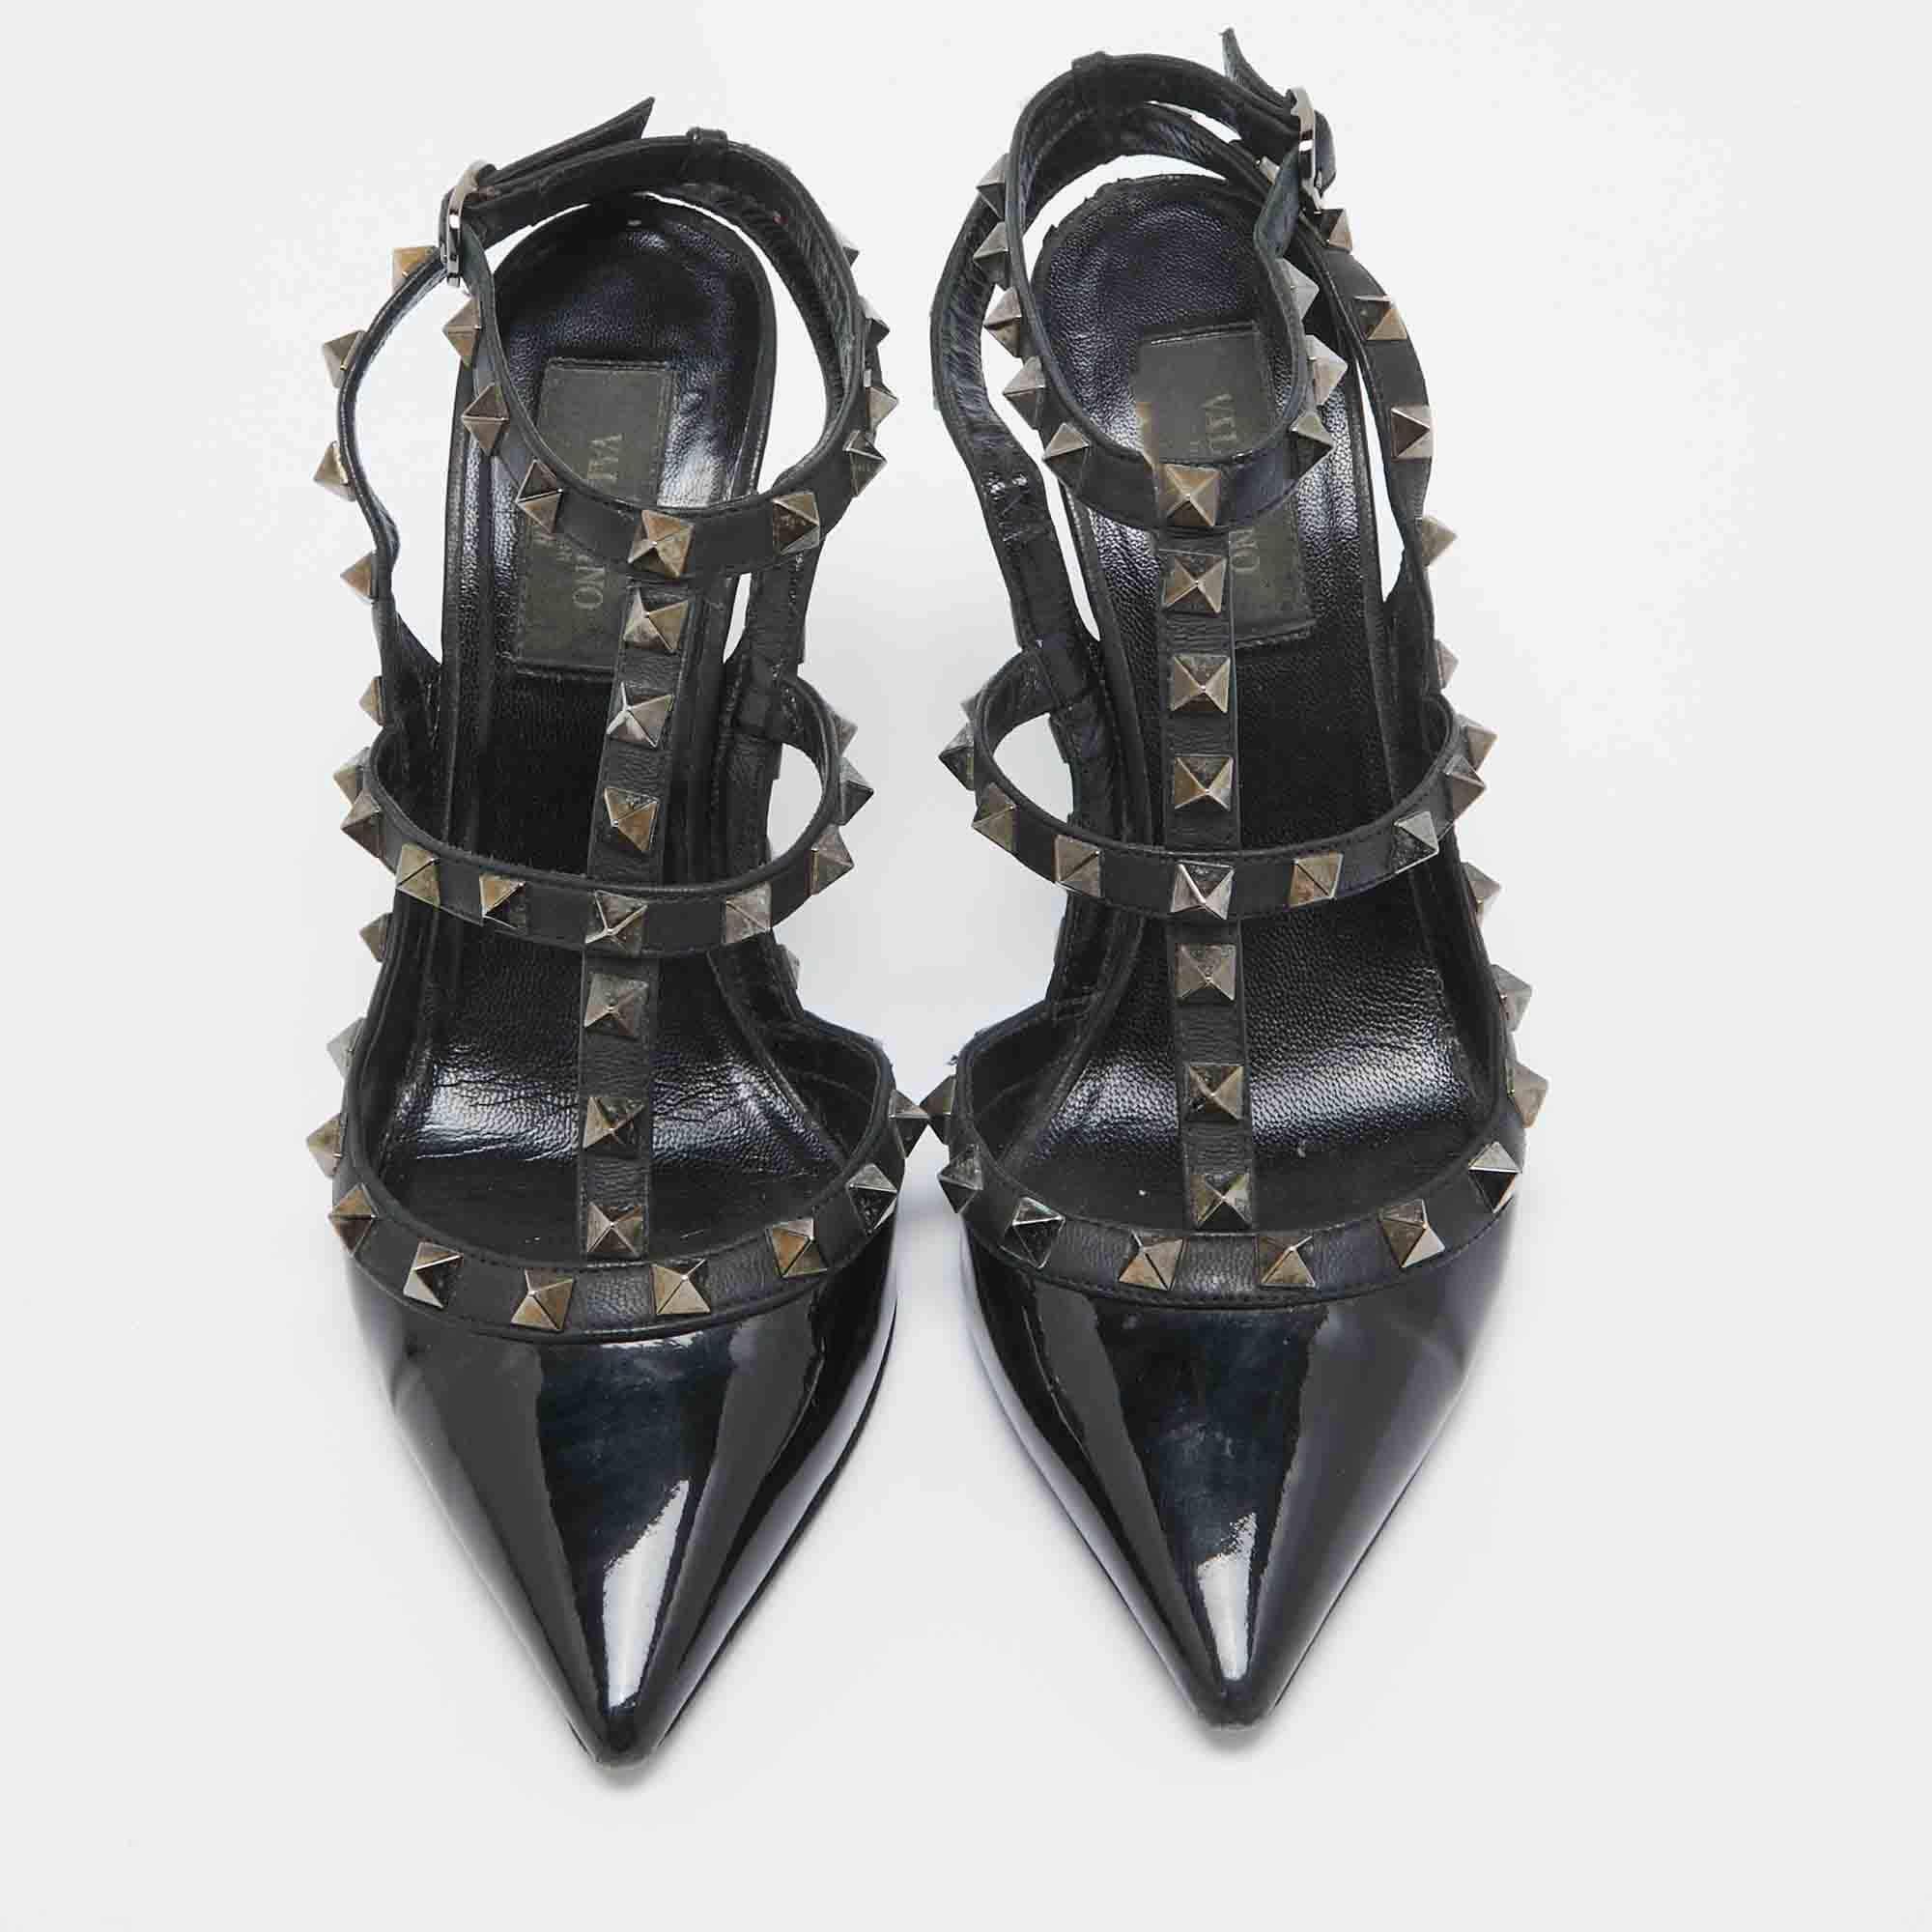 The elegantly placed Rockstuds on the outline of this pair of Valentino pumps makes it captivating. Crafted from patent leather, it is perfectly raised on 10cm heels and cut into a pointed-toe silhouette.

